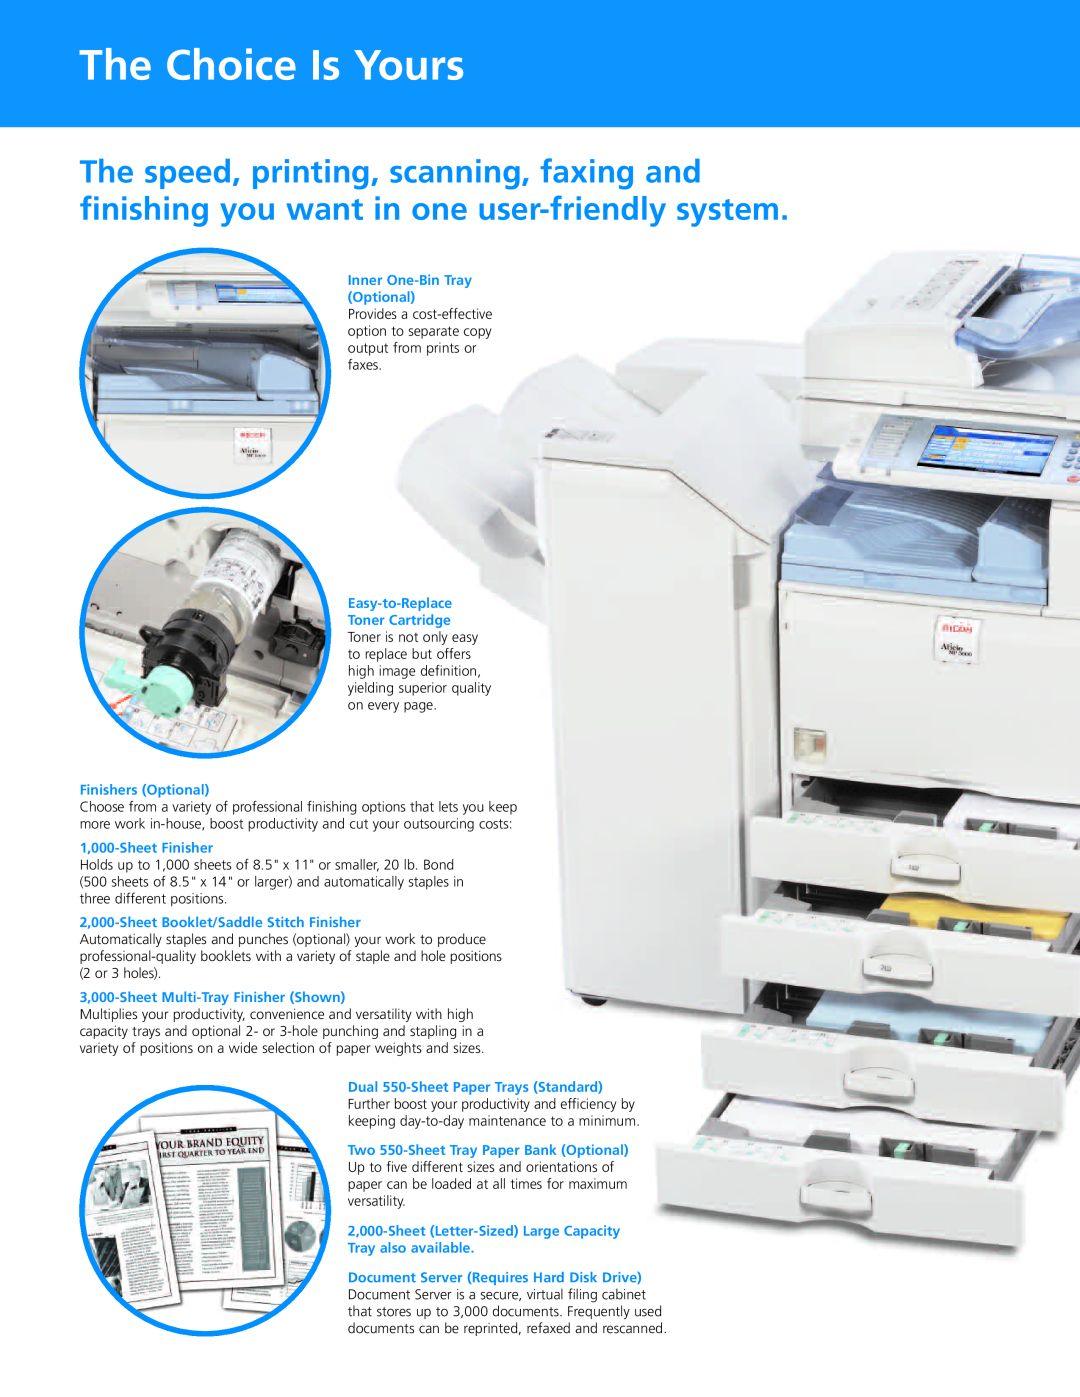 Ricoh MP 4000 The Choice Is Yours, Inner One-Bin Tray Optional, Easy-to-Replace, Finishers Optional, 1,000-Sheet Finisher 